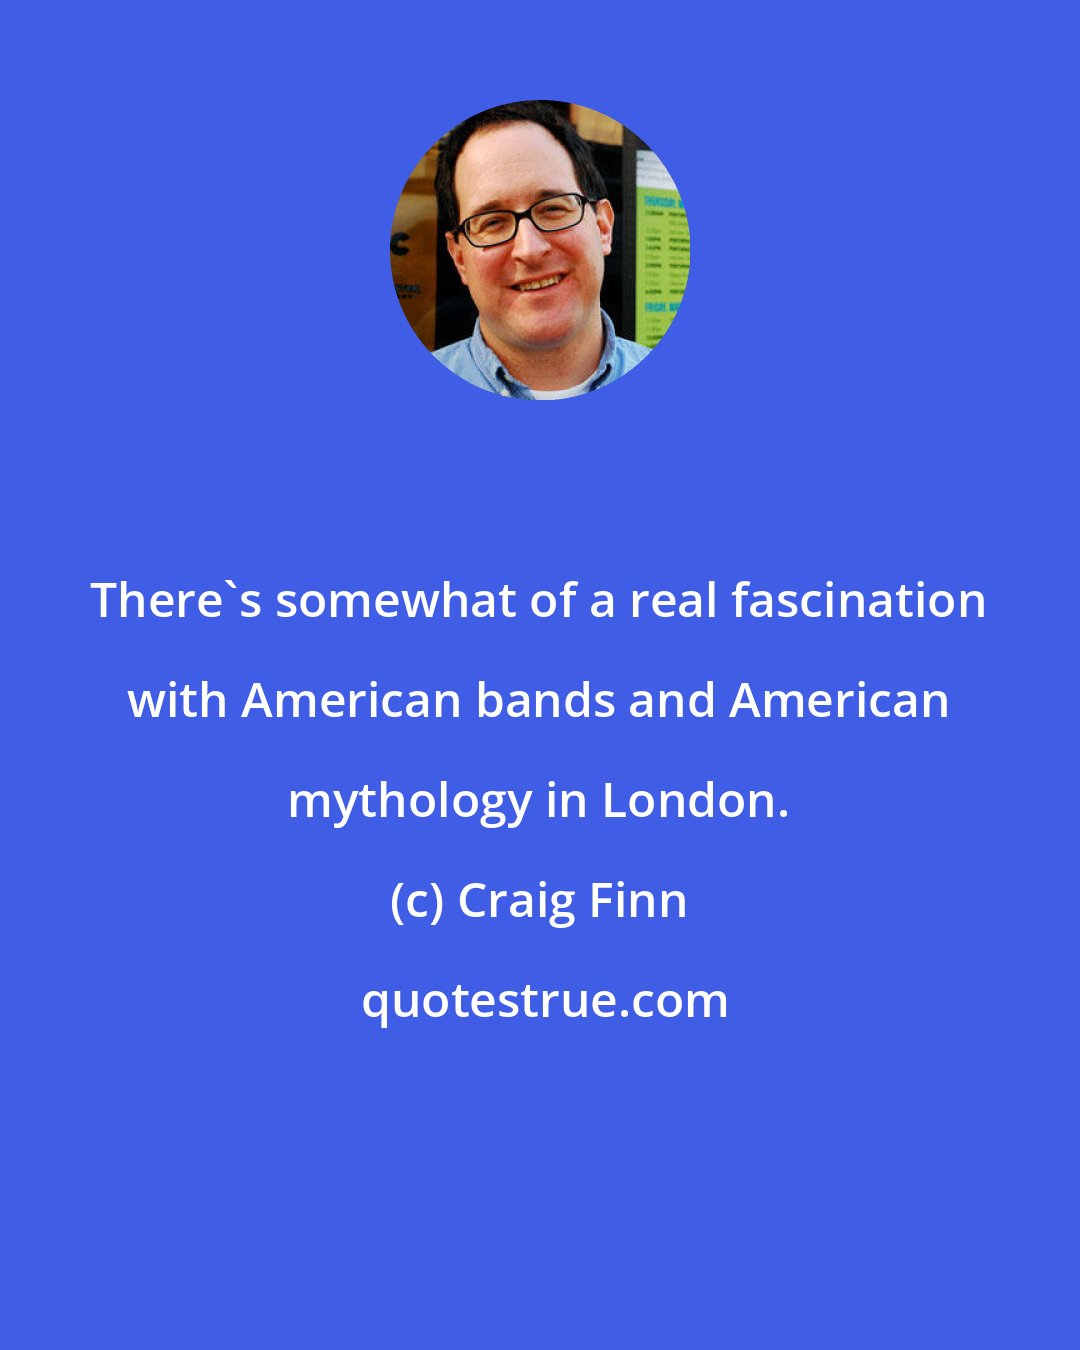 Craig Finn: There's somewhat of a real fascination with American bands and American mythology in London.